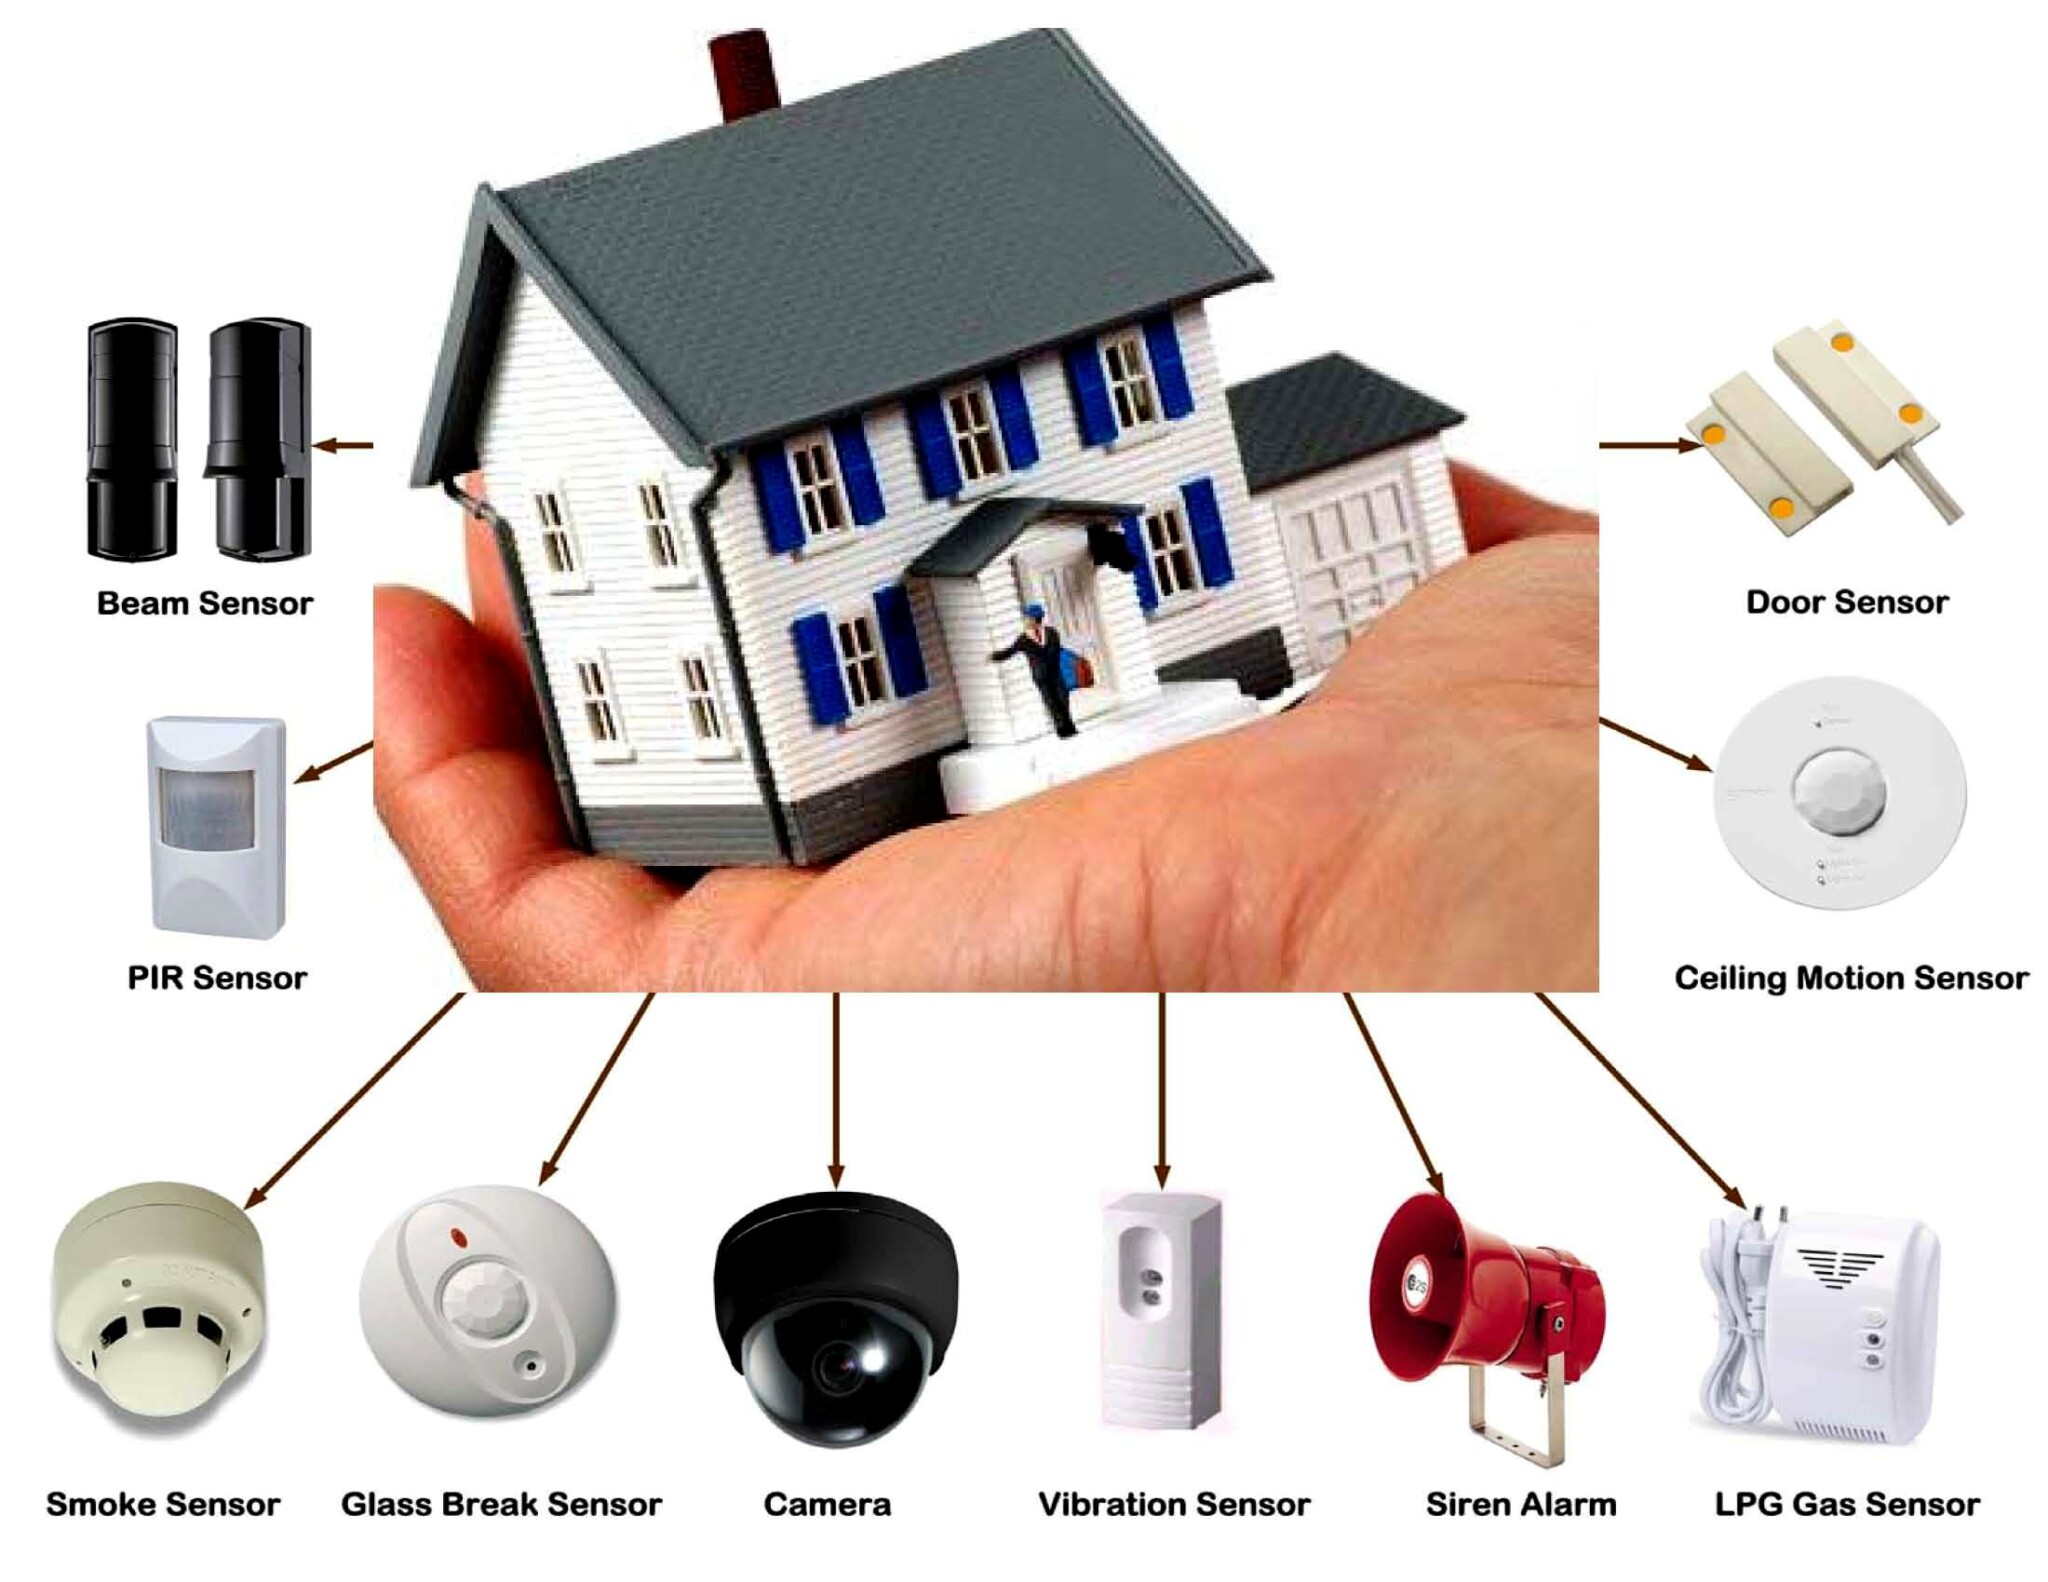 presentation on home security system